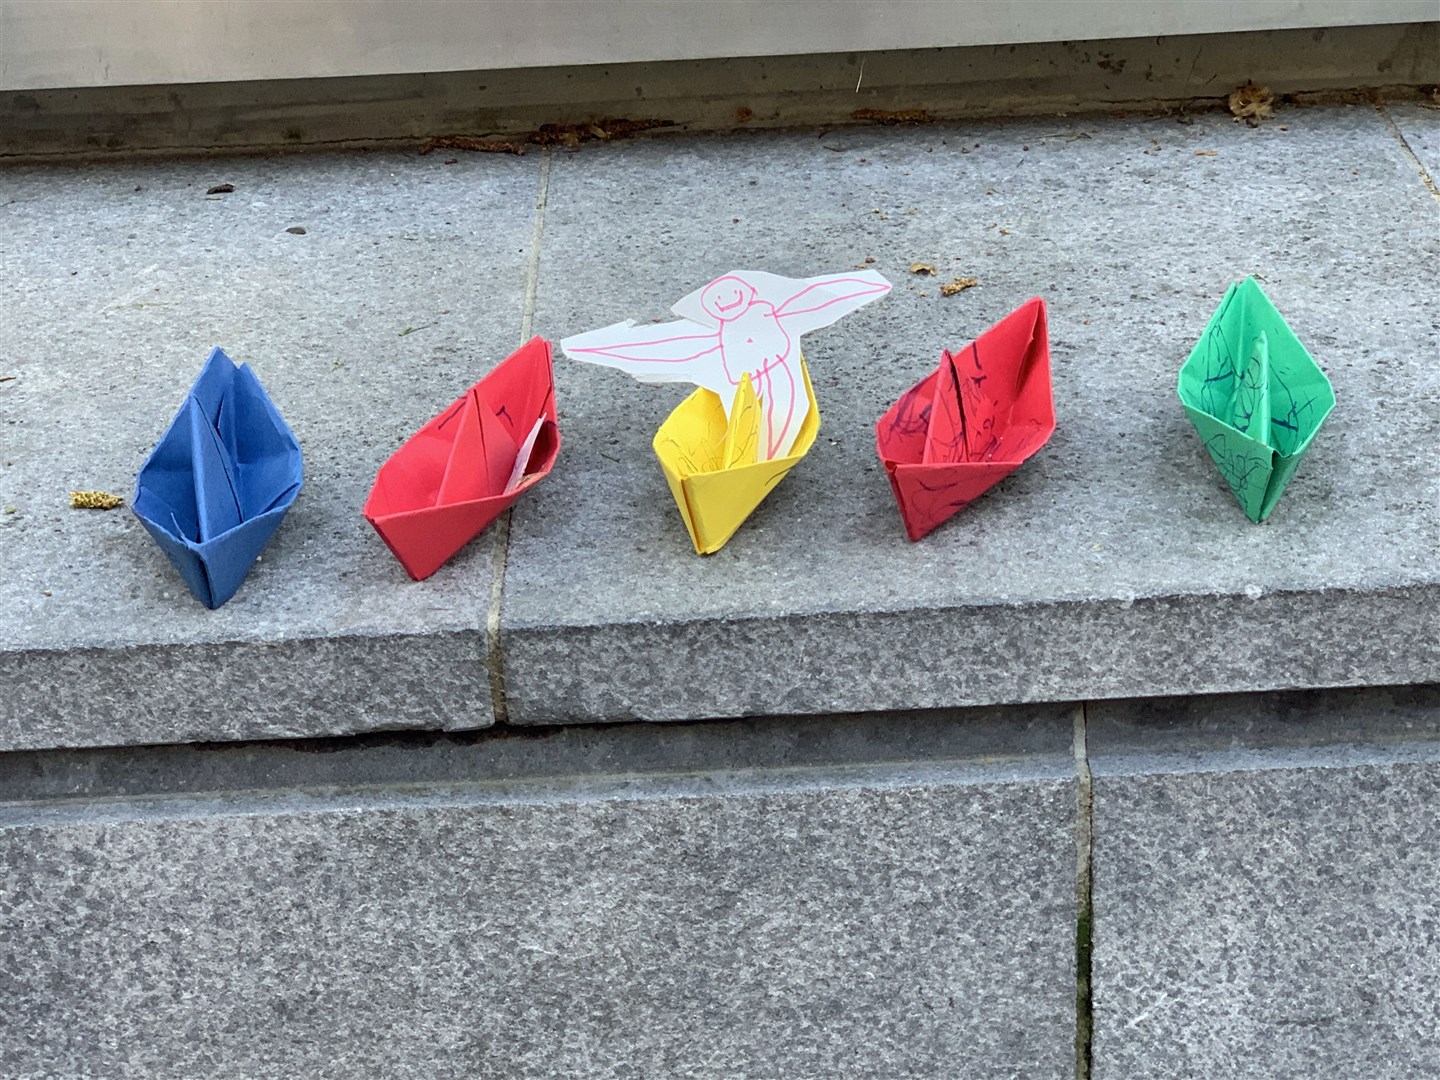 Extinction Rebellion demonstrators placed paper boats outside the Home Office (Lucas Cumiskey/PA)